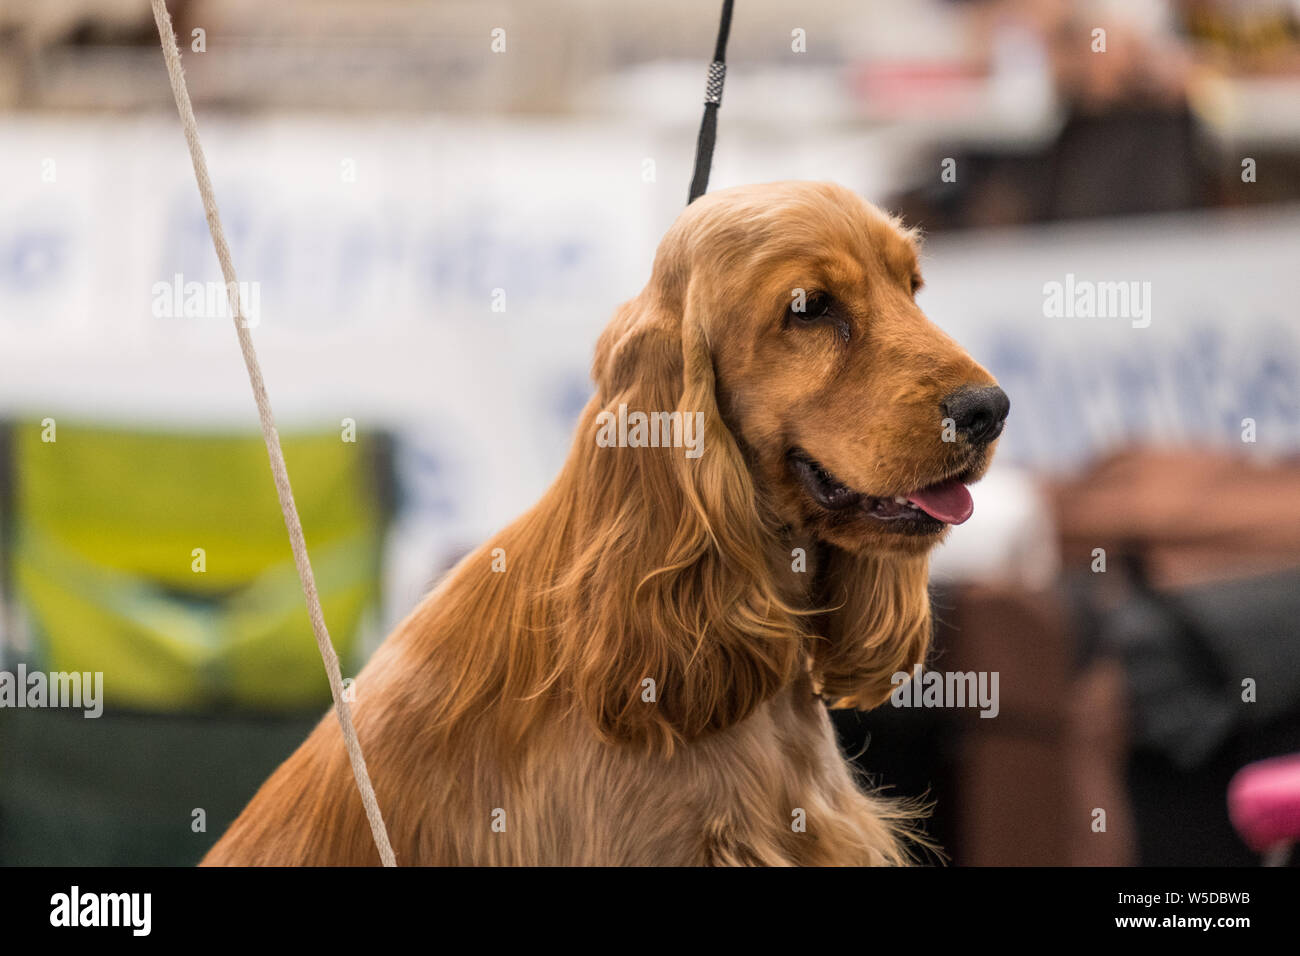 A subject of Red solid color English Cocker Spaniel on a leash during a dog show. The English Cocker Spaniel is a breed of gun dog. Stock Photo